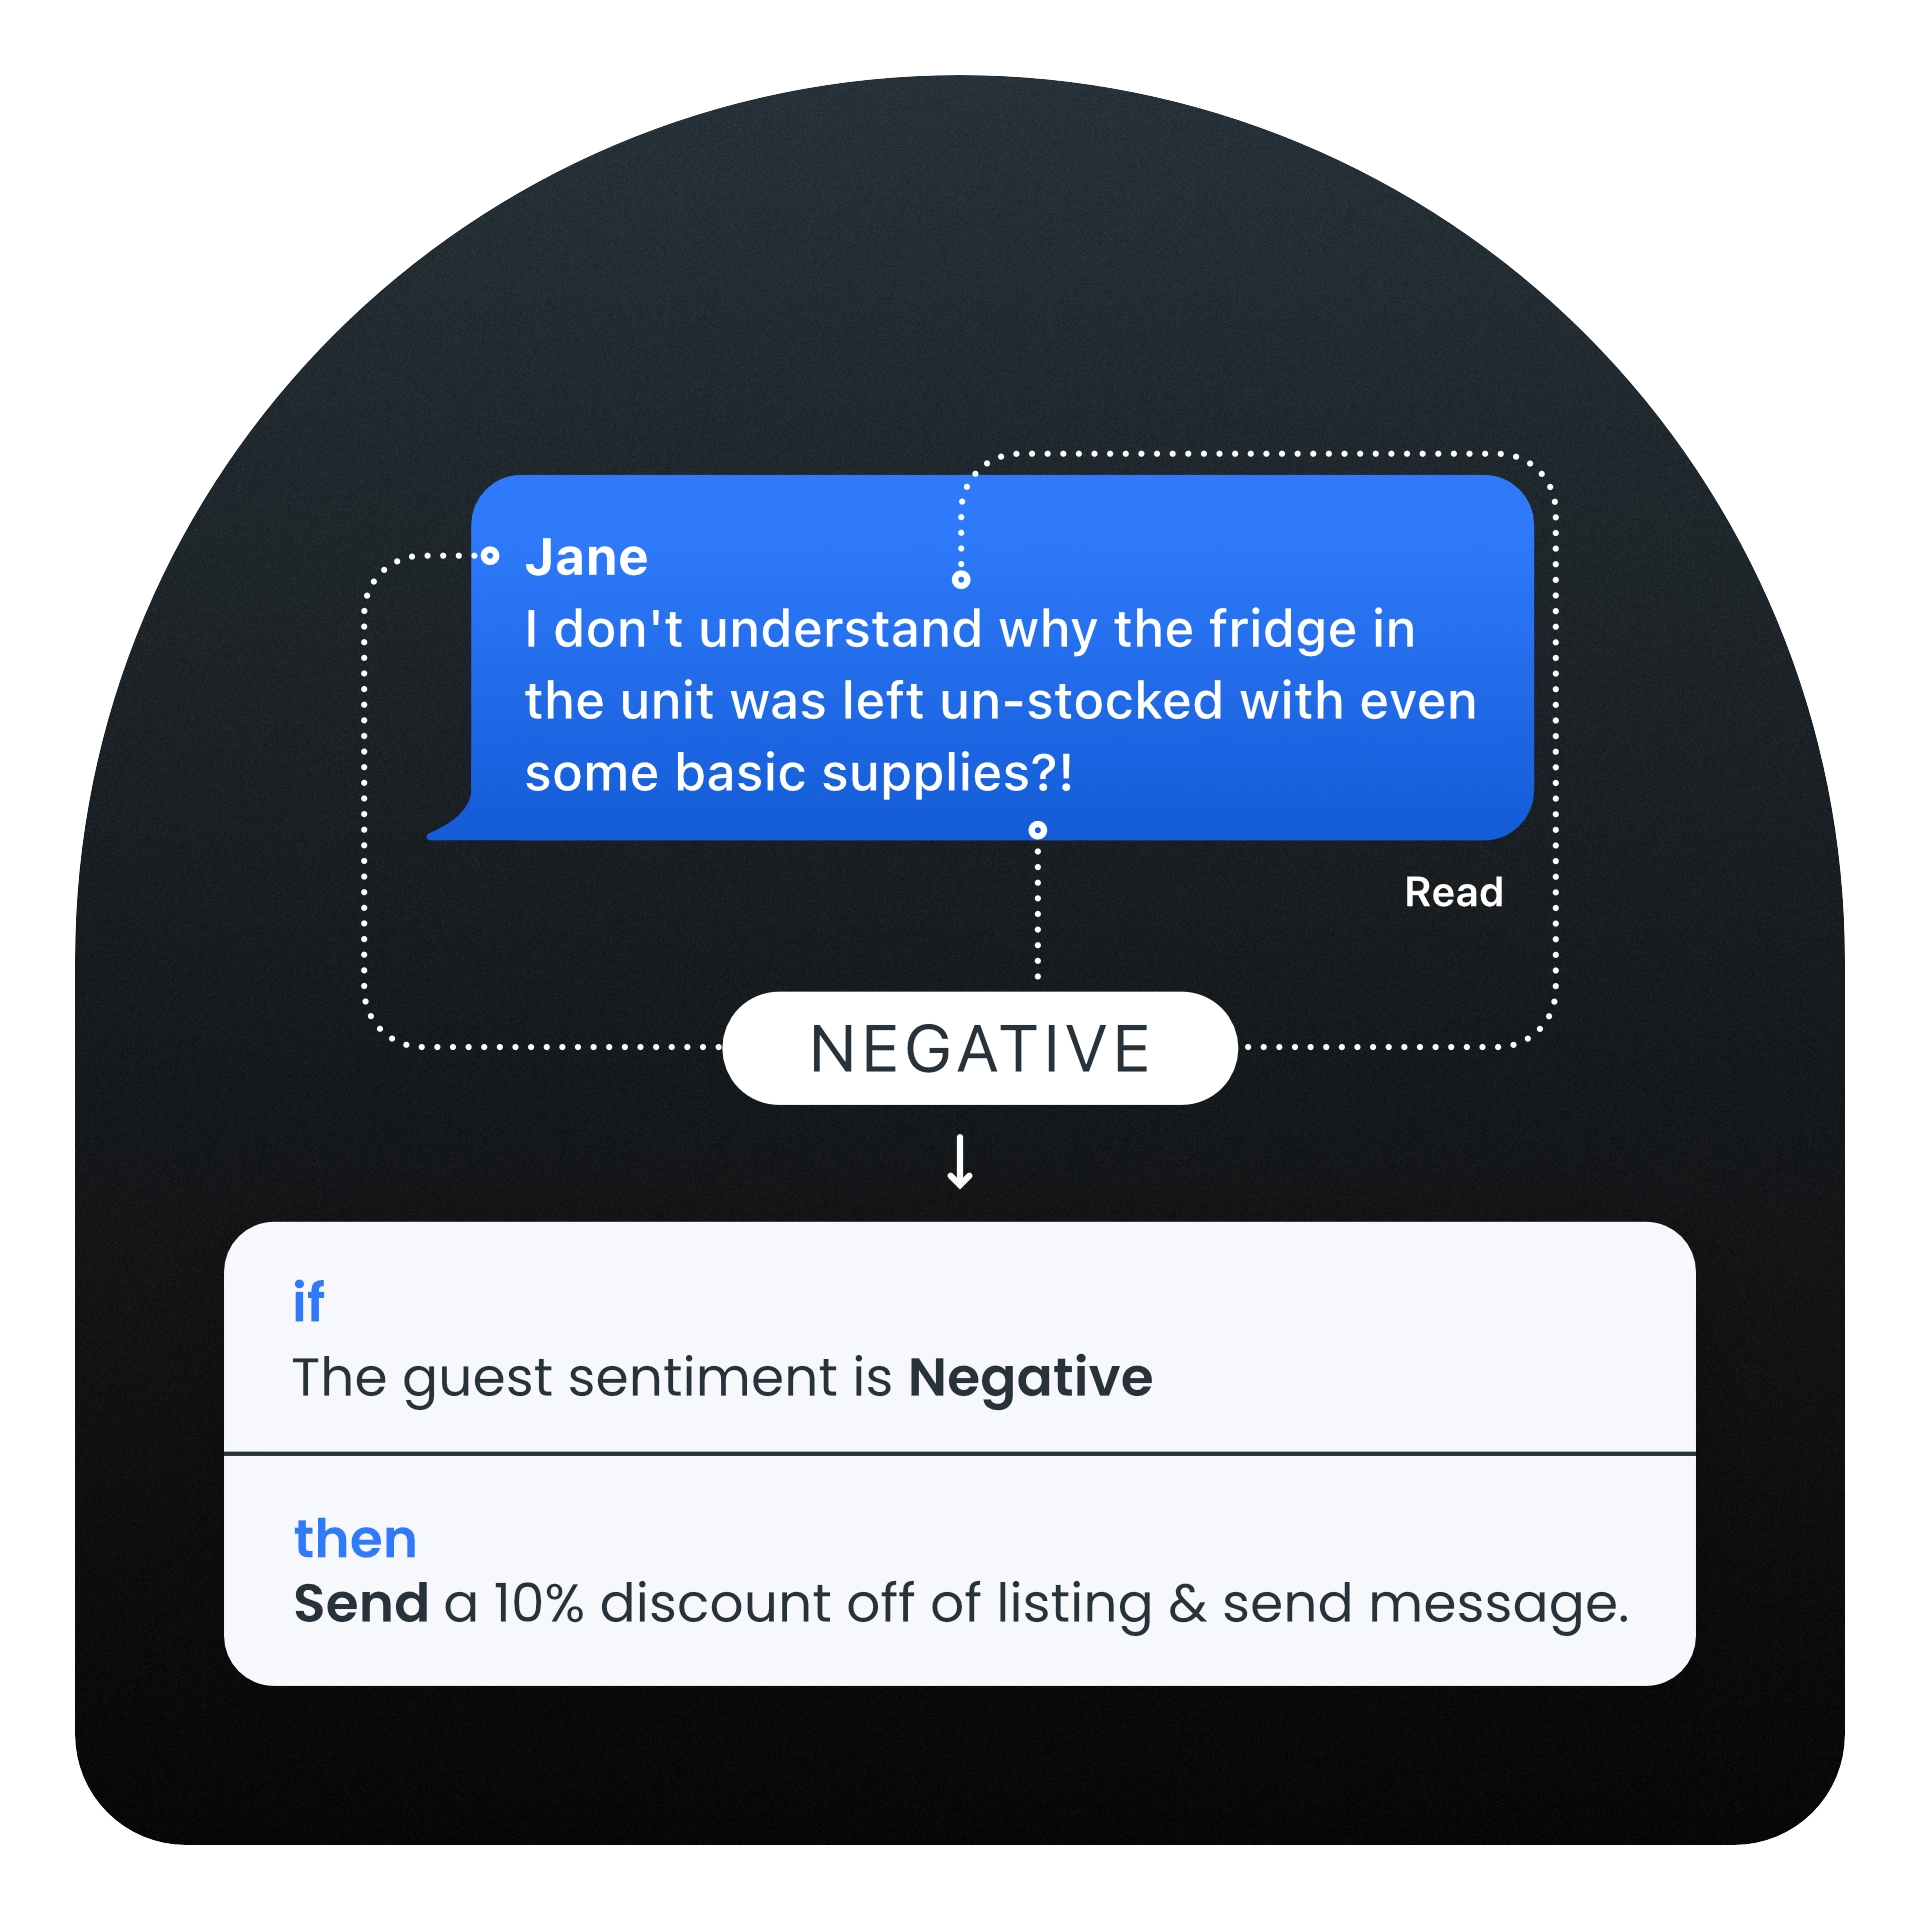 Guest messaging automation based on the sentiment recognition